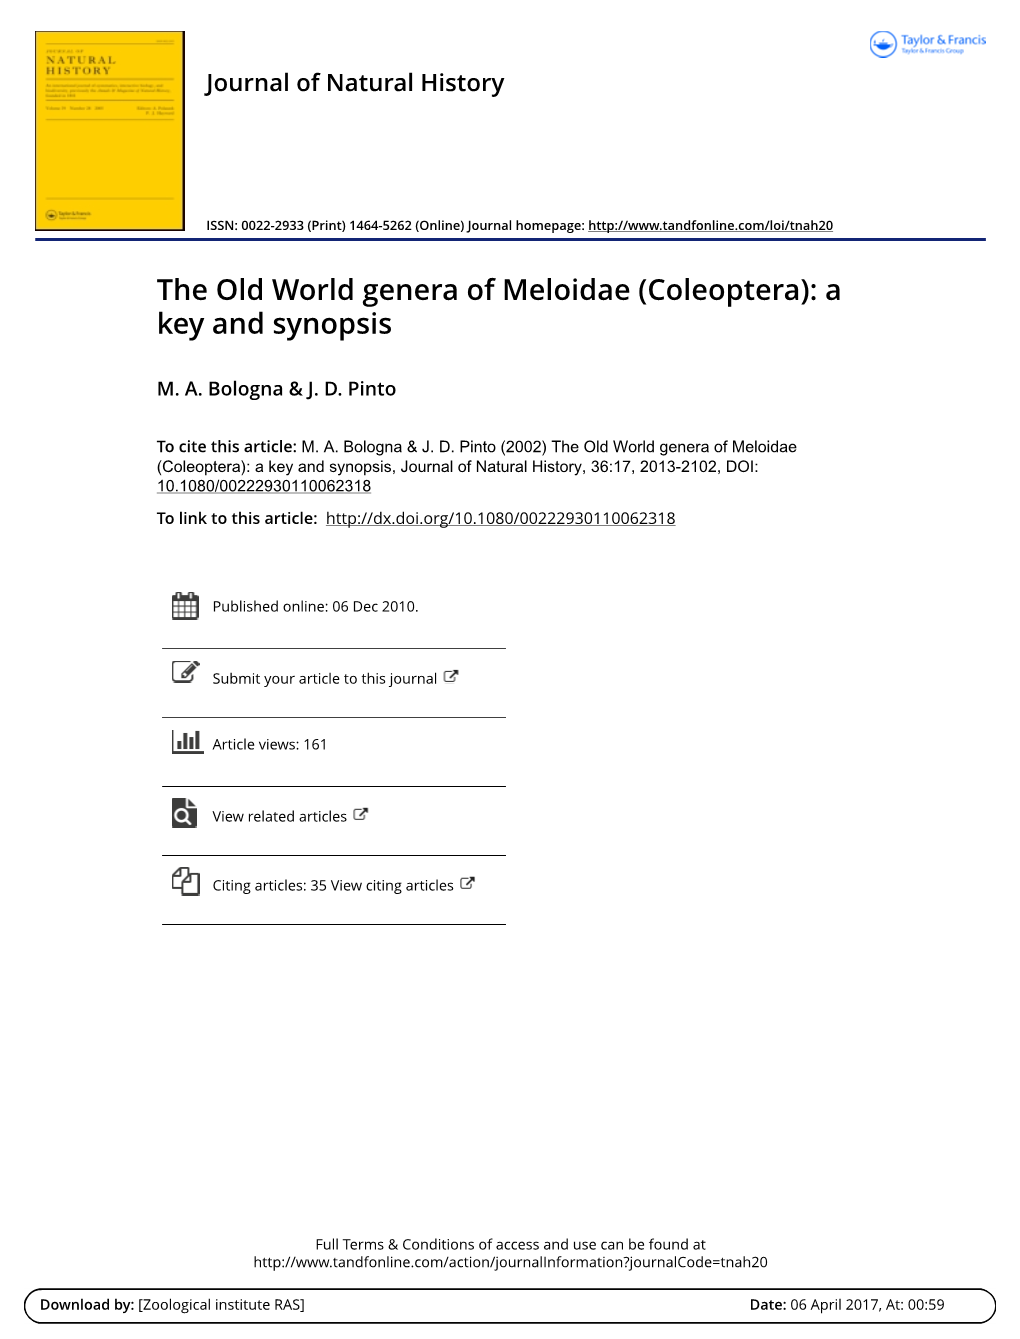 The Old World Genera of Meloidae (Coleoptera): a Key and Synopsis